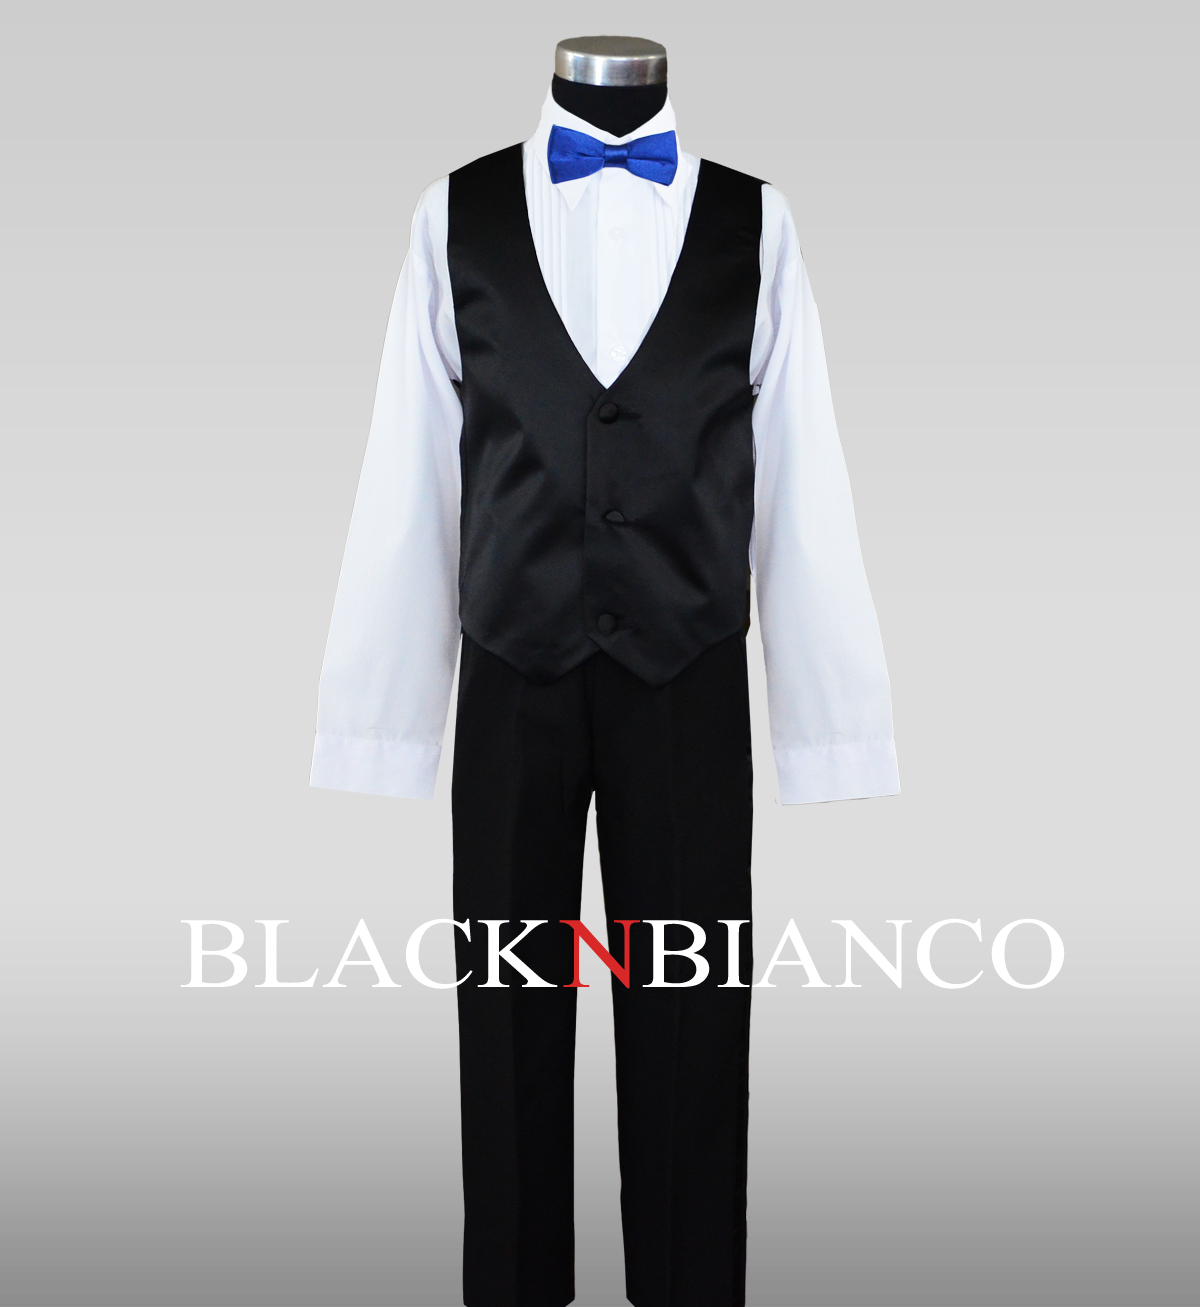 Boys Tuxedos in Black with Royal Blue Bow Tie and Black Bow Tie - image 4 of 5